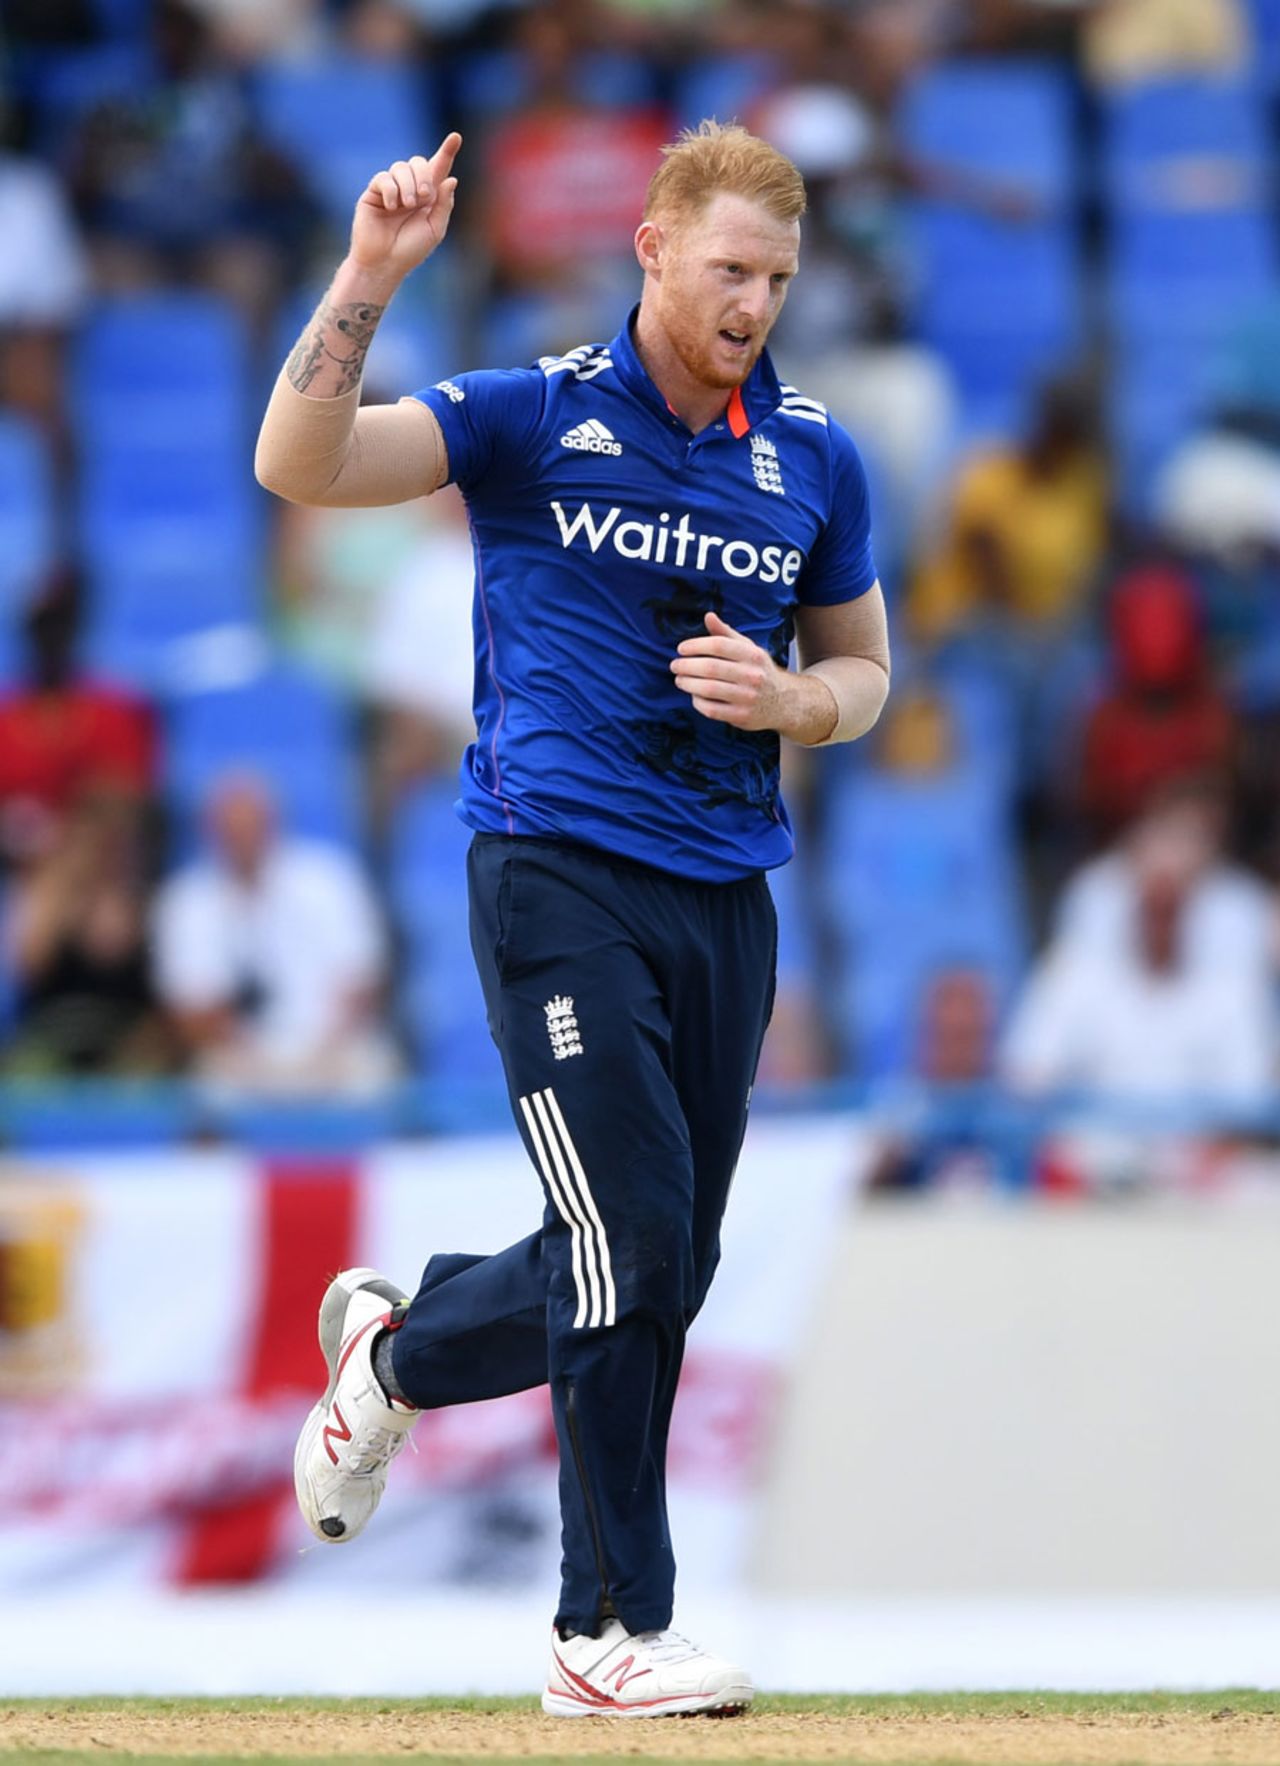 Ben Stokes had Shai Hope caught behind, West Indies v England, 2nd ODI, Antigua, March 5, 2017